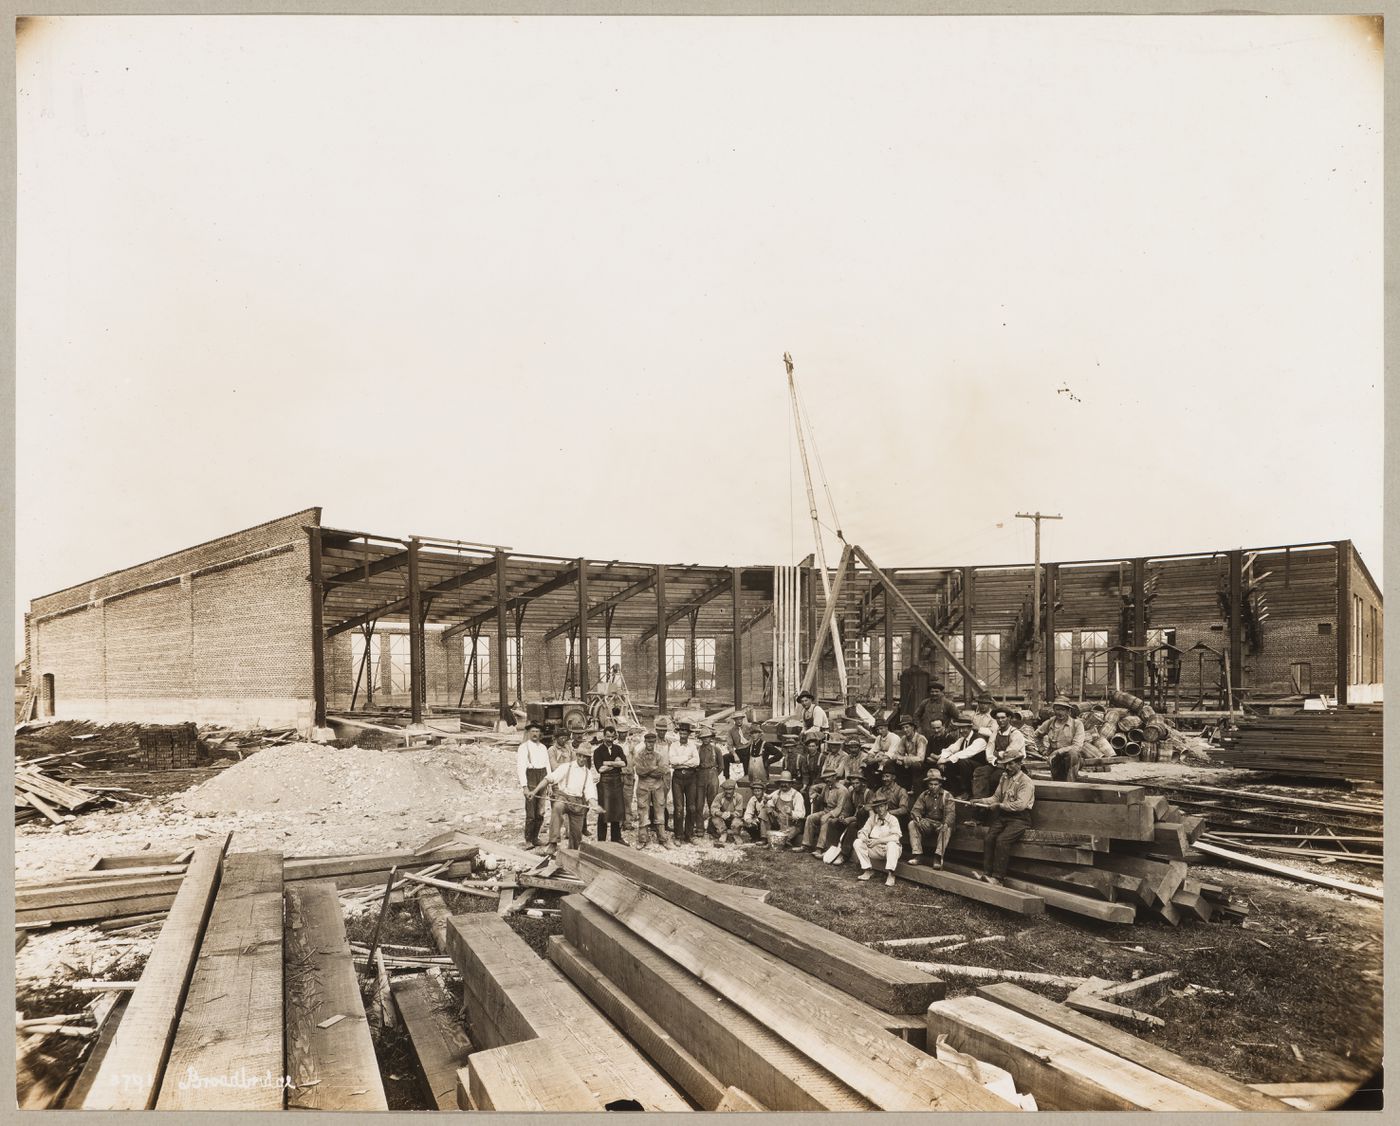 Group portrait of workers in front of the Canadian Pacific Railroad Company Roundhouse under construction, Coquitlam (now Port Coquitlam), British Columbia